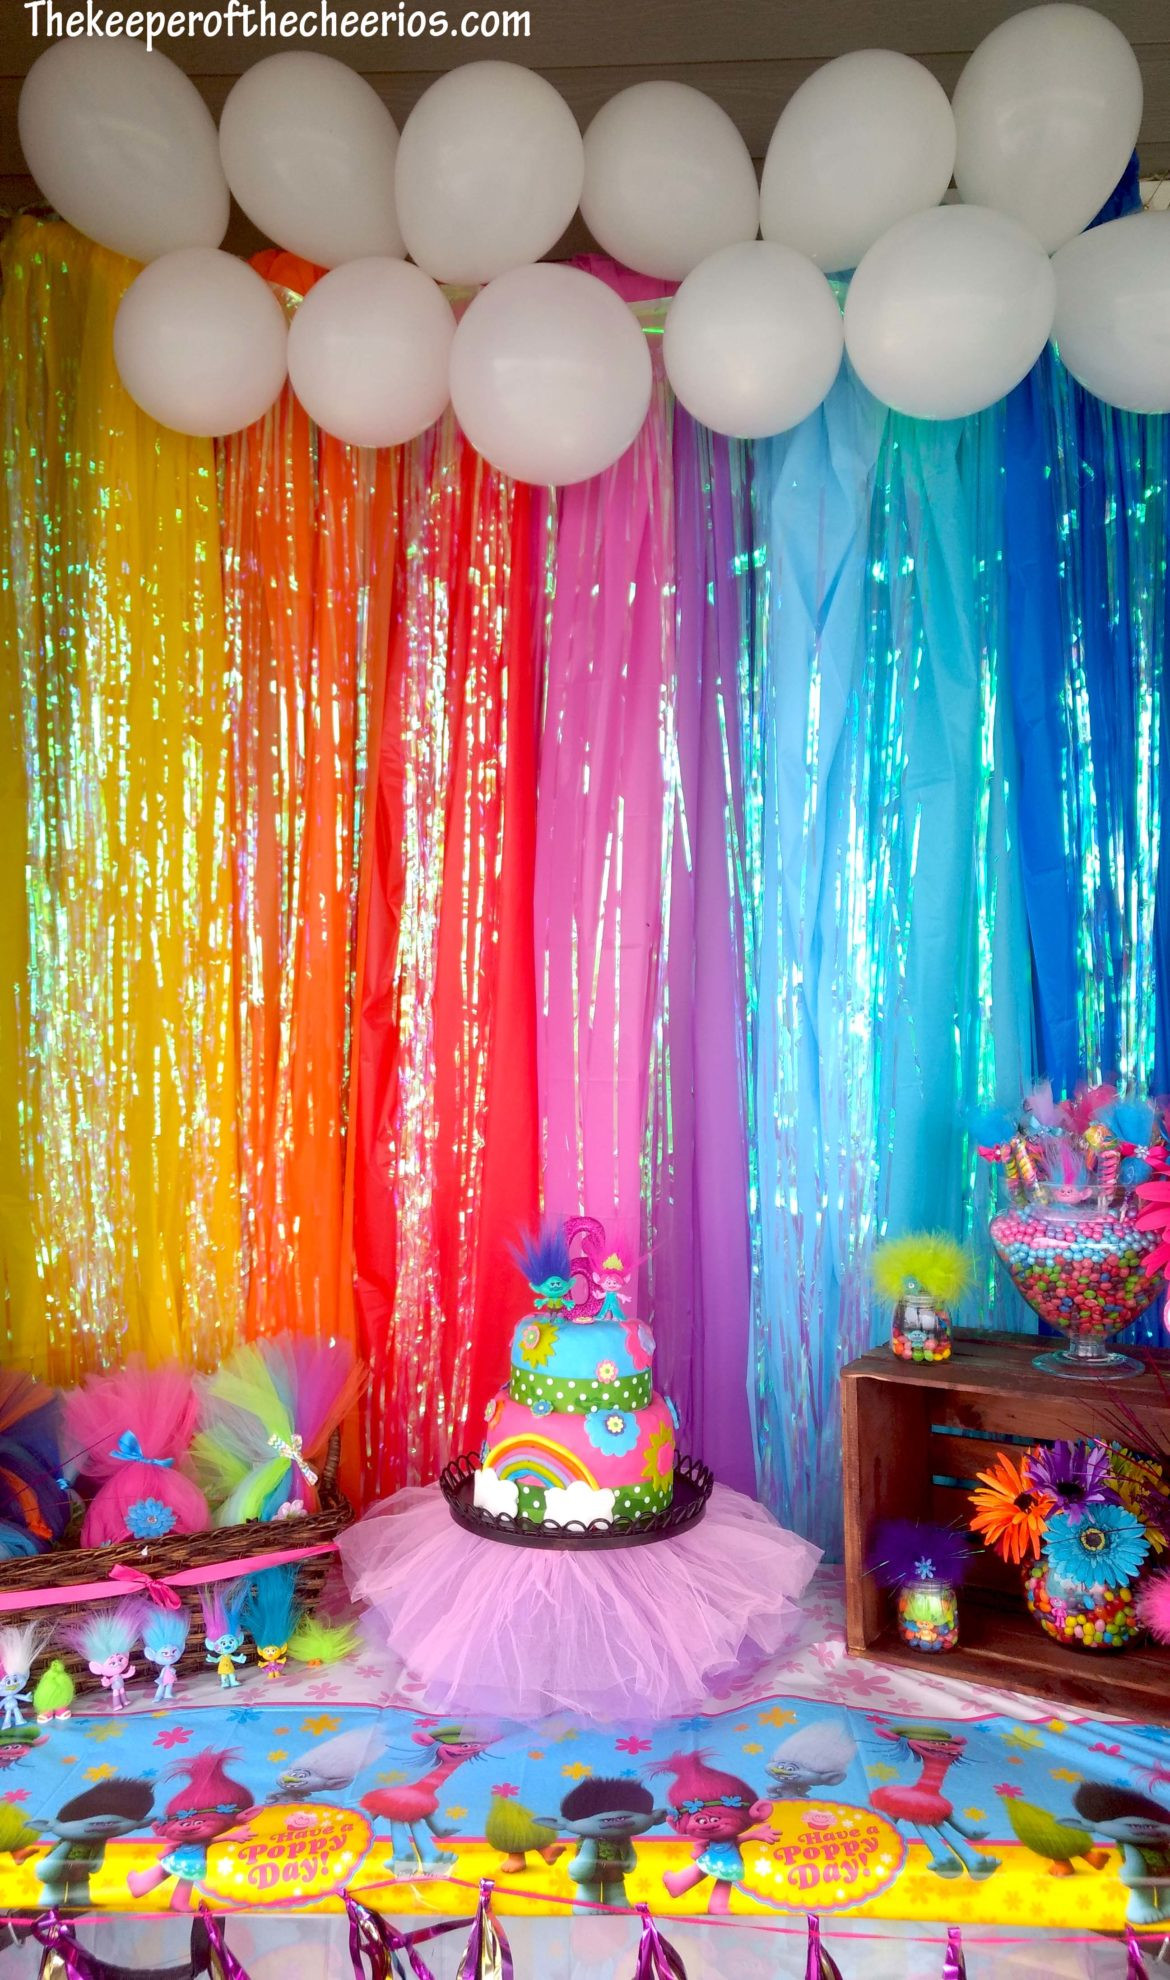 Trolls Theme Party Ideas
 Trolls Birthday Party The Keeper of the Cheerios